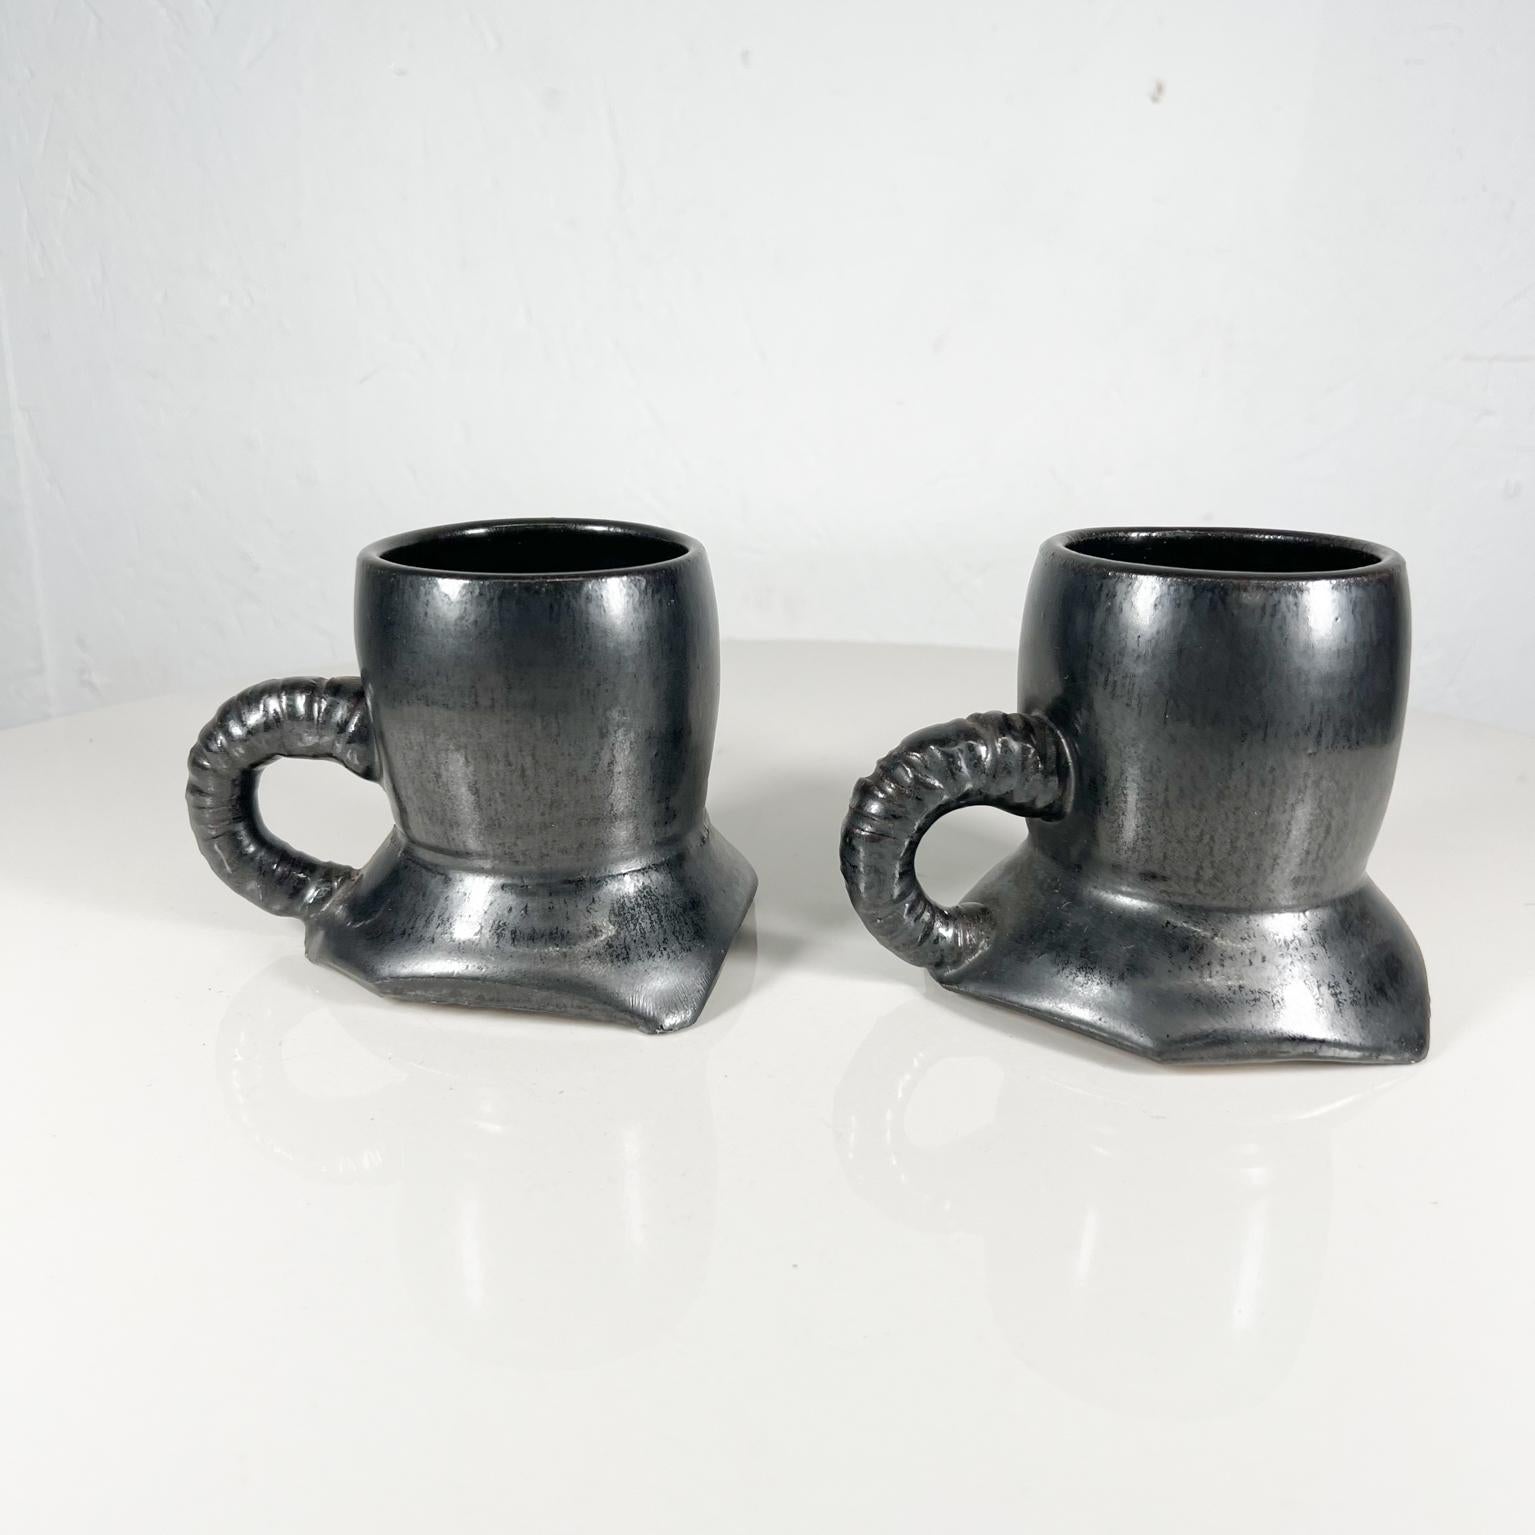 1980s Black Mugs Sculptural Pottery Art Coffee Cups Signed Melching In Good Condition For Sale In Chula Vista, CA